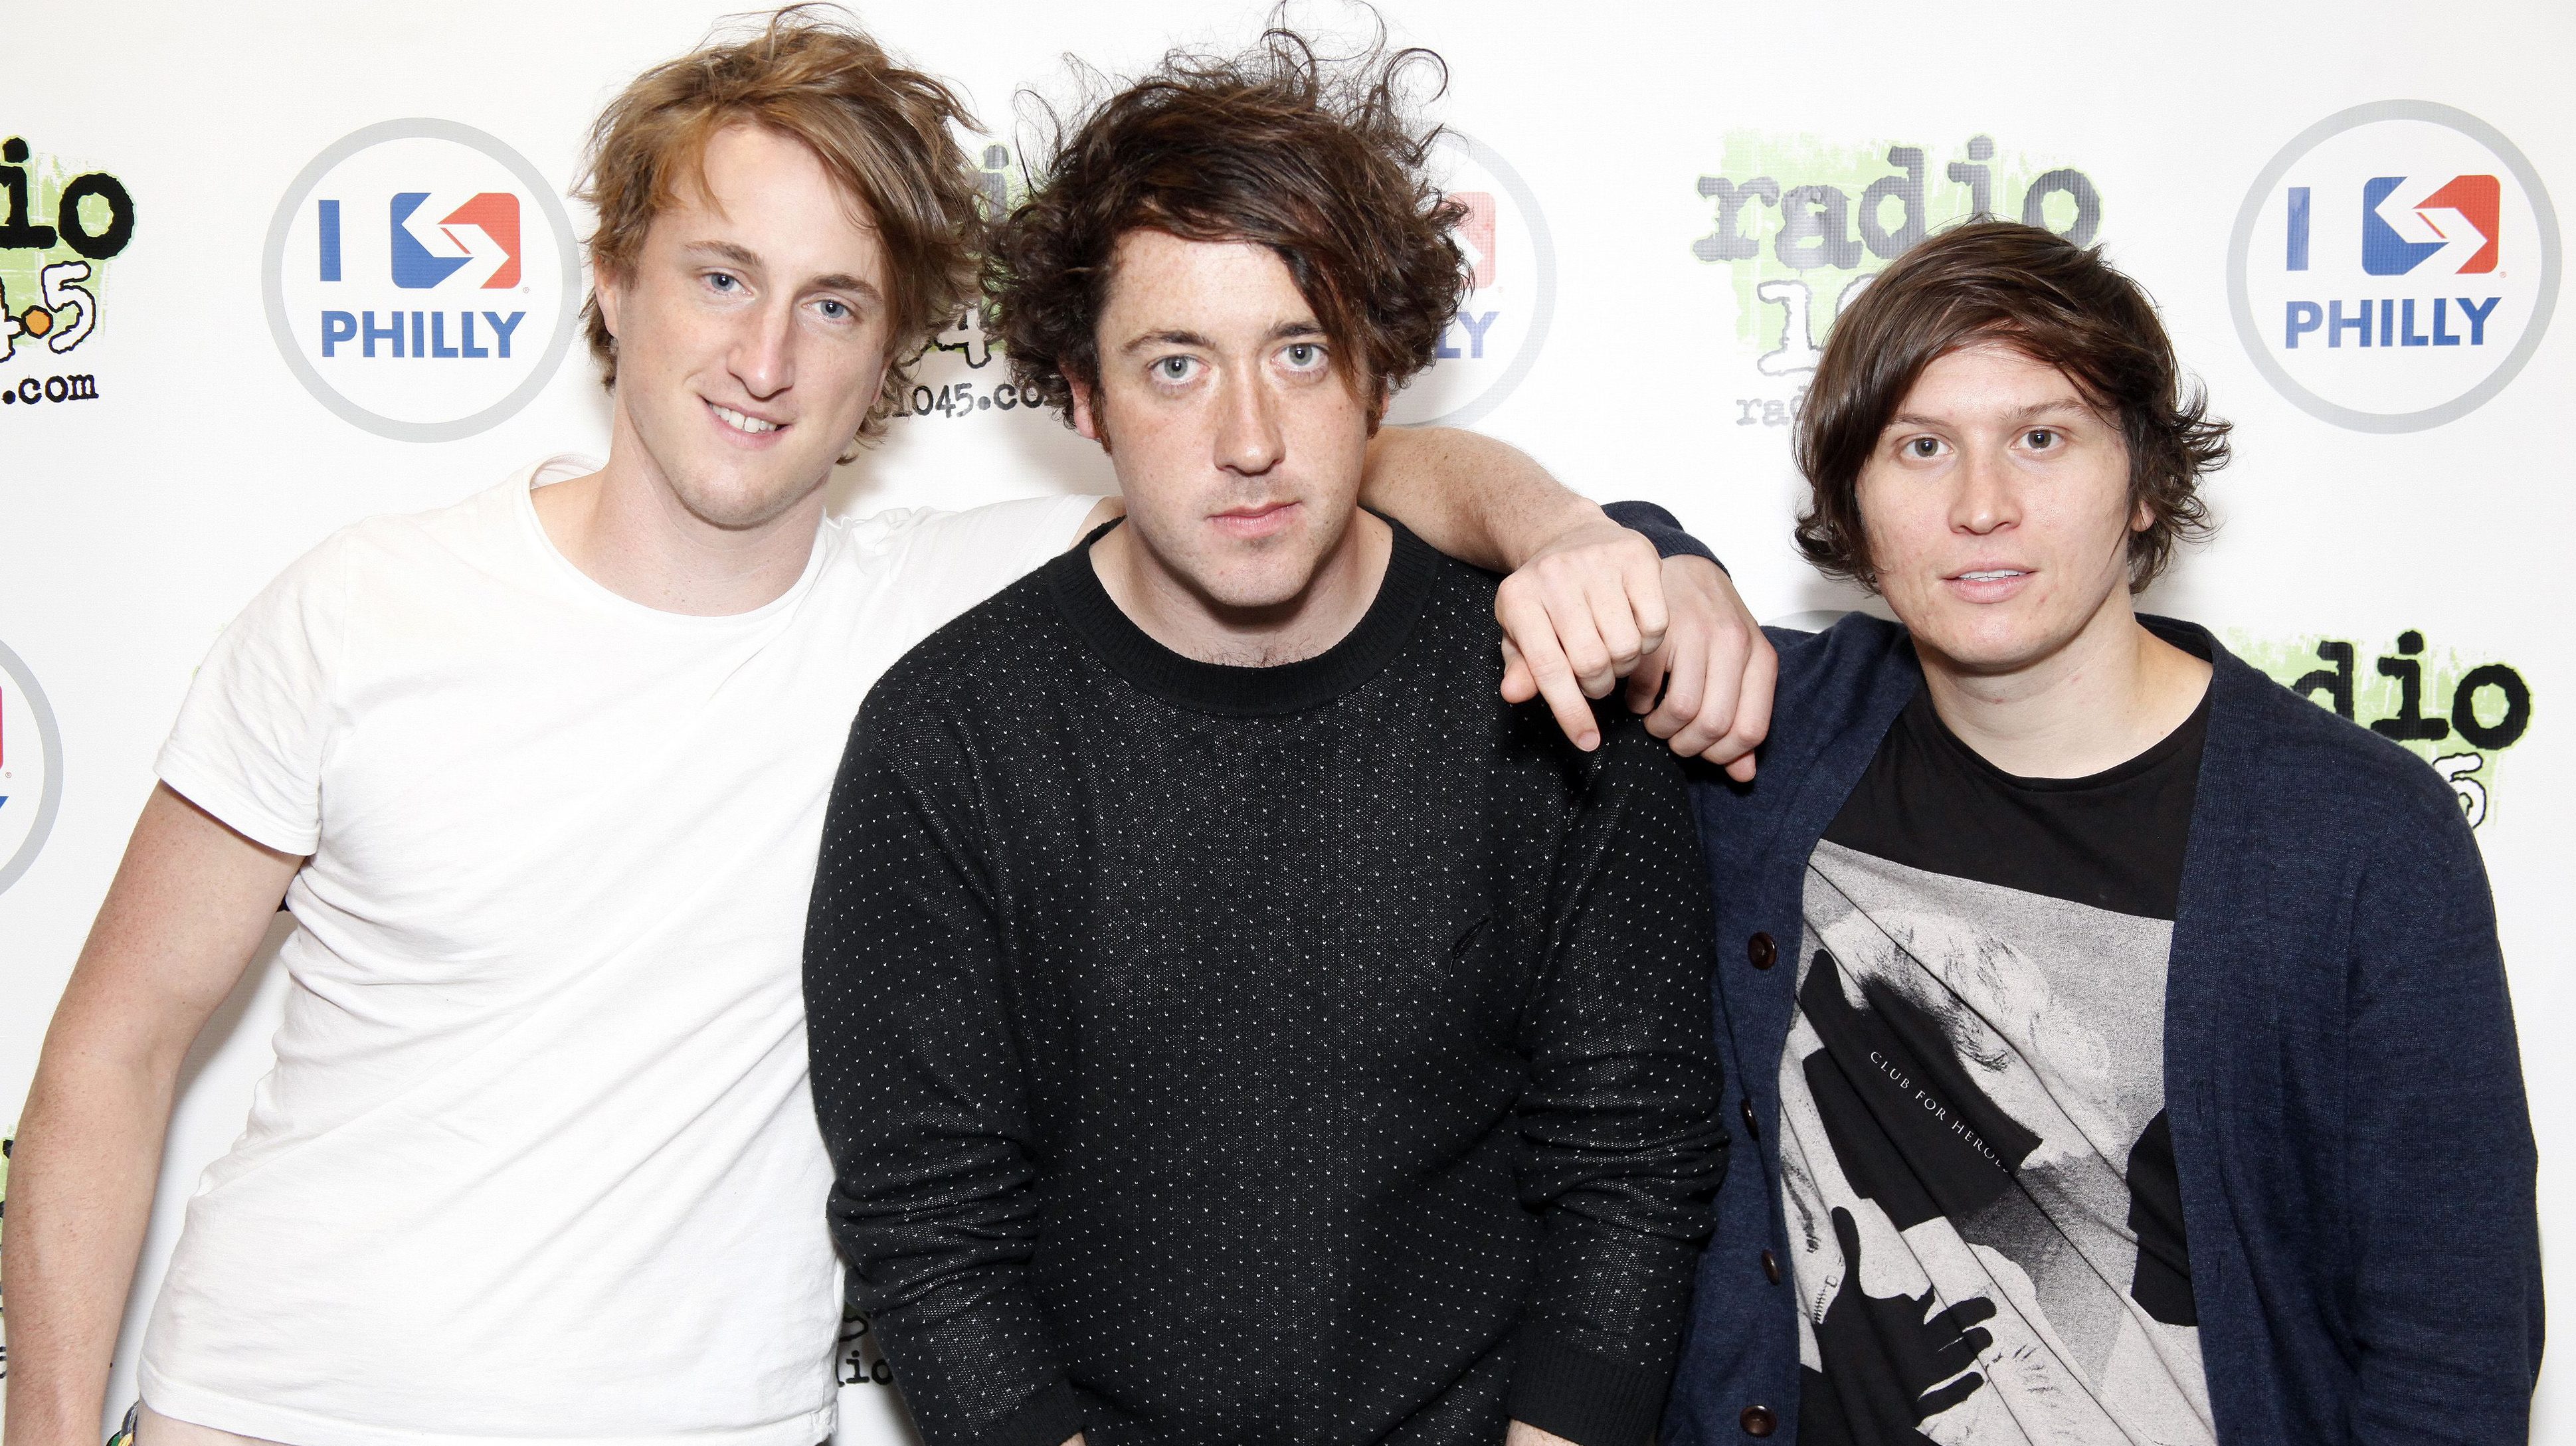 The Wombats’ new album will not ruin your life